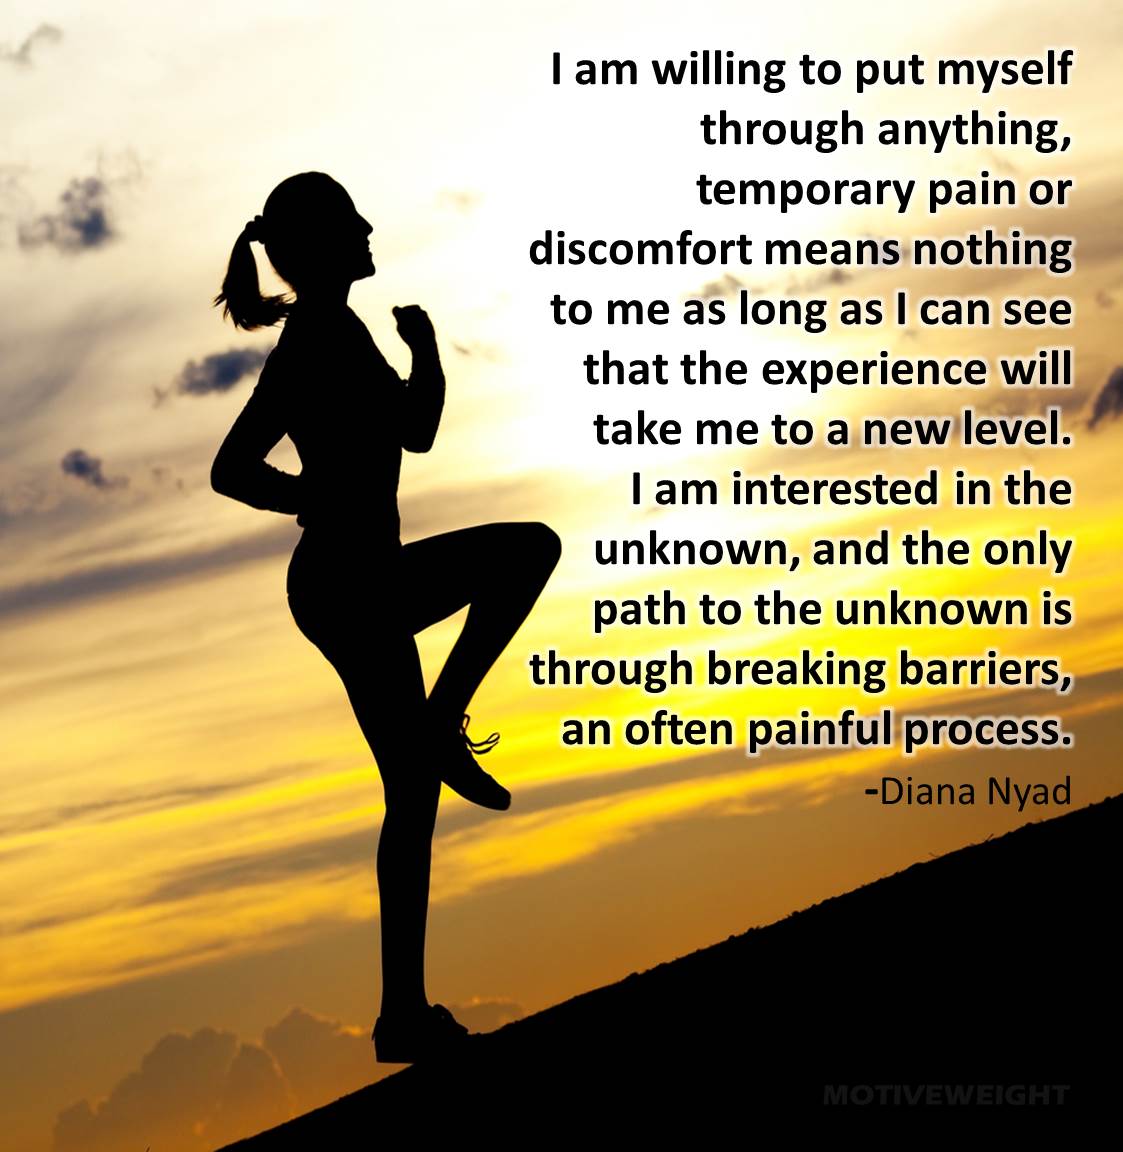 I am willing to put myself through anything; temporary pain or discomfort means nothing to me as long as I can see that the experience will take me to a new level .